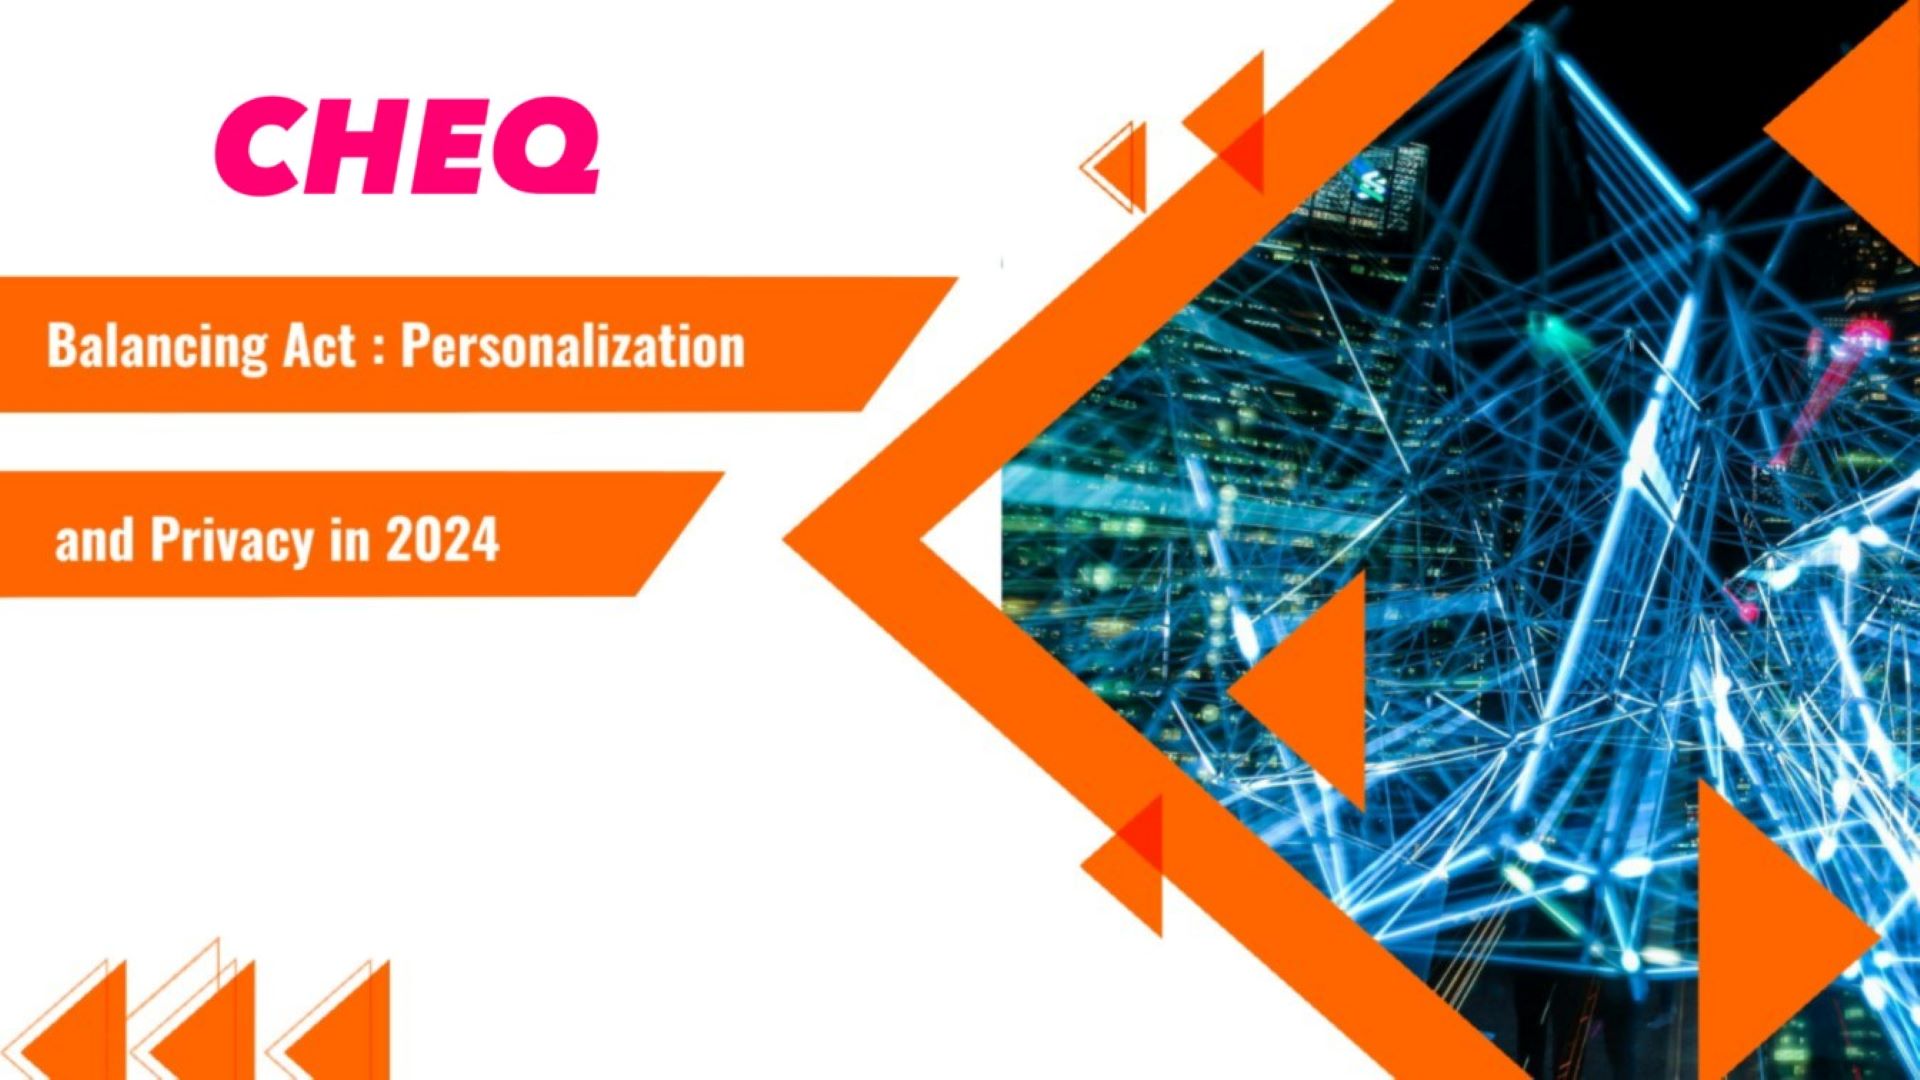 Balancing Act: Personalization and Privacy in 2024